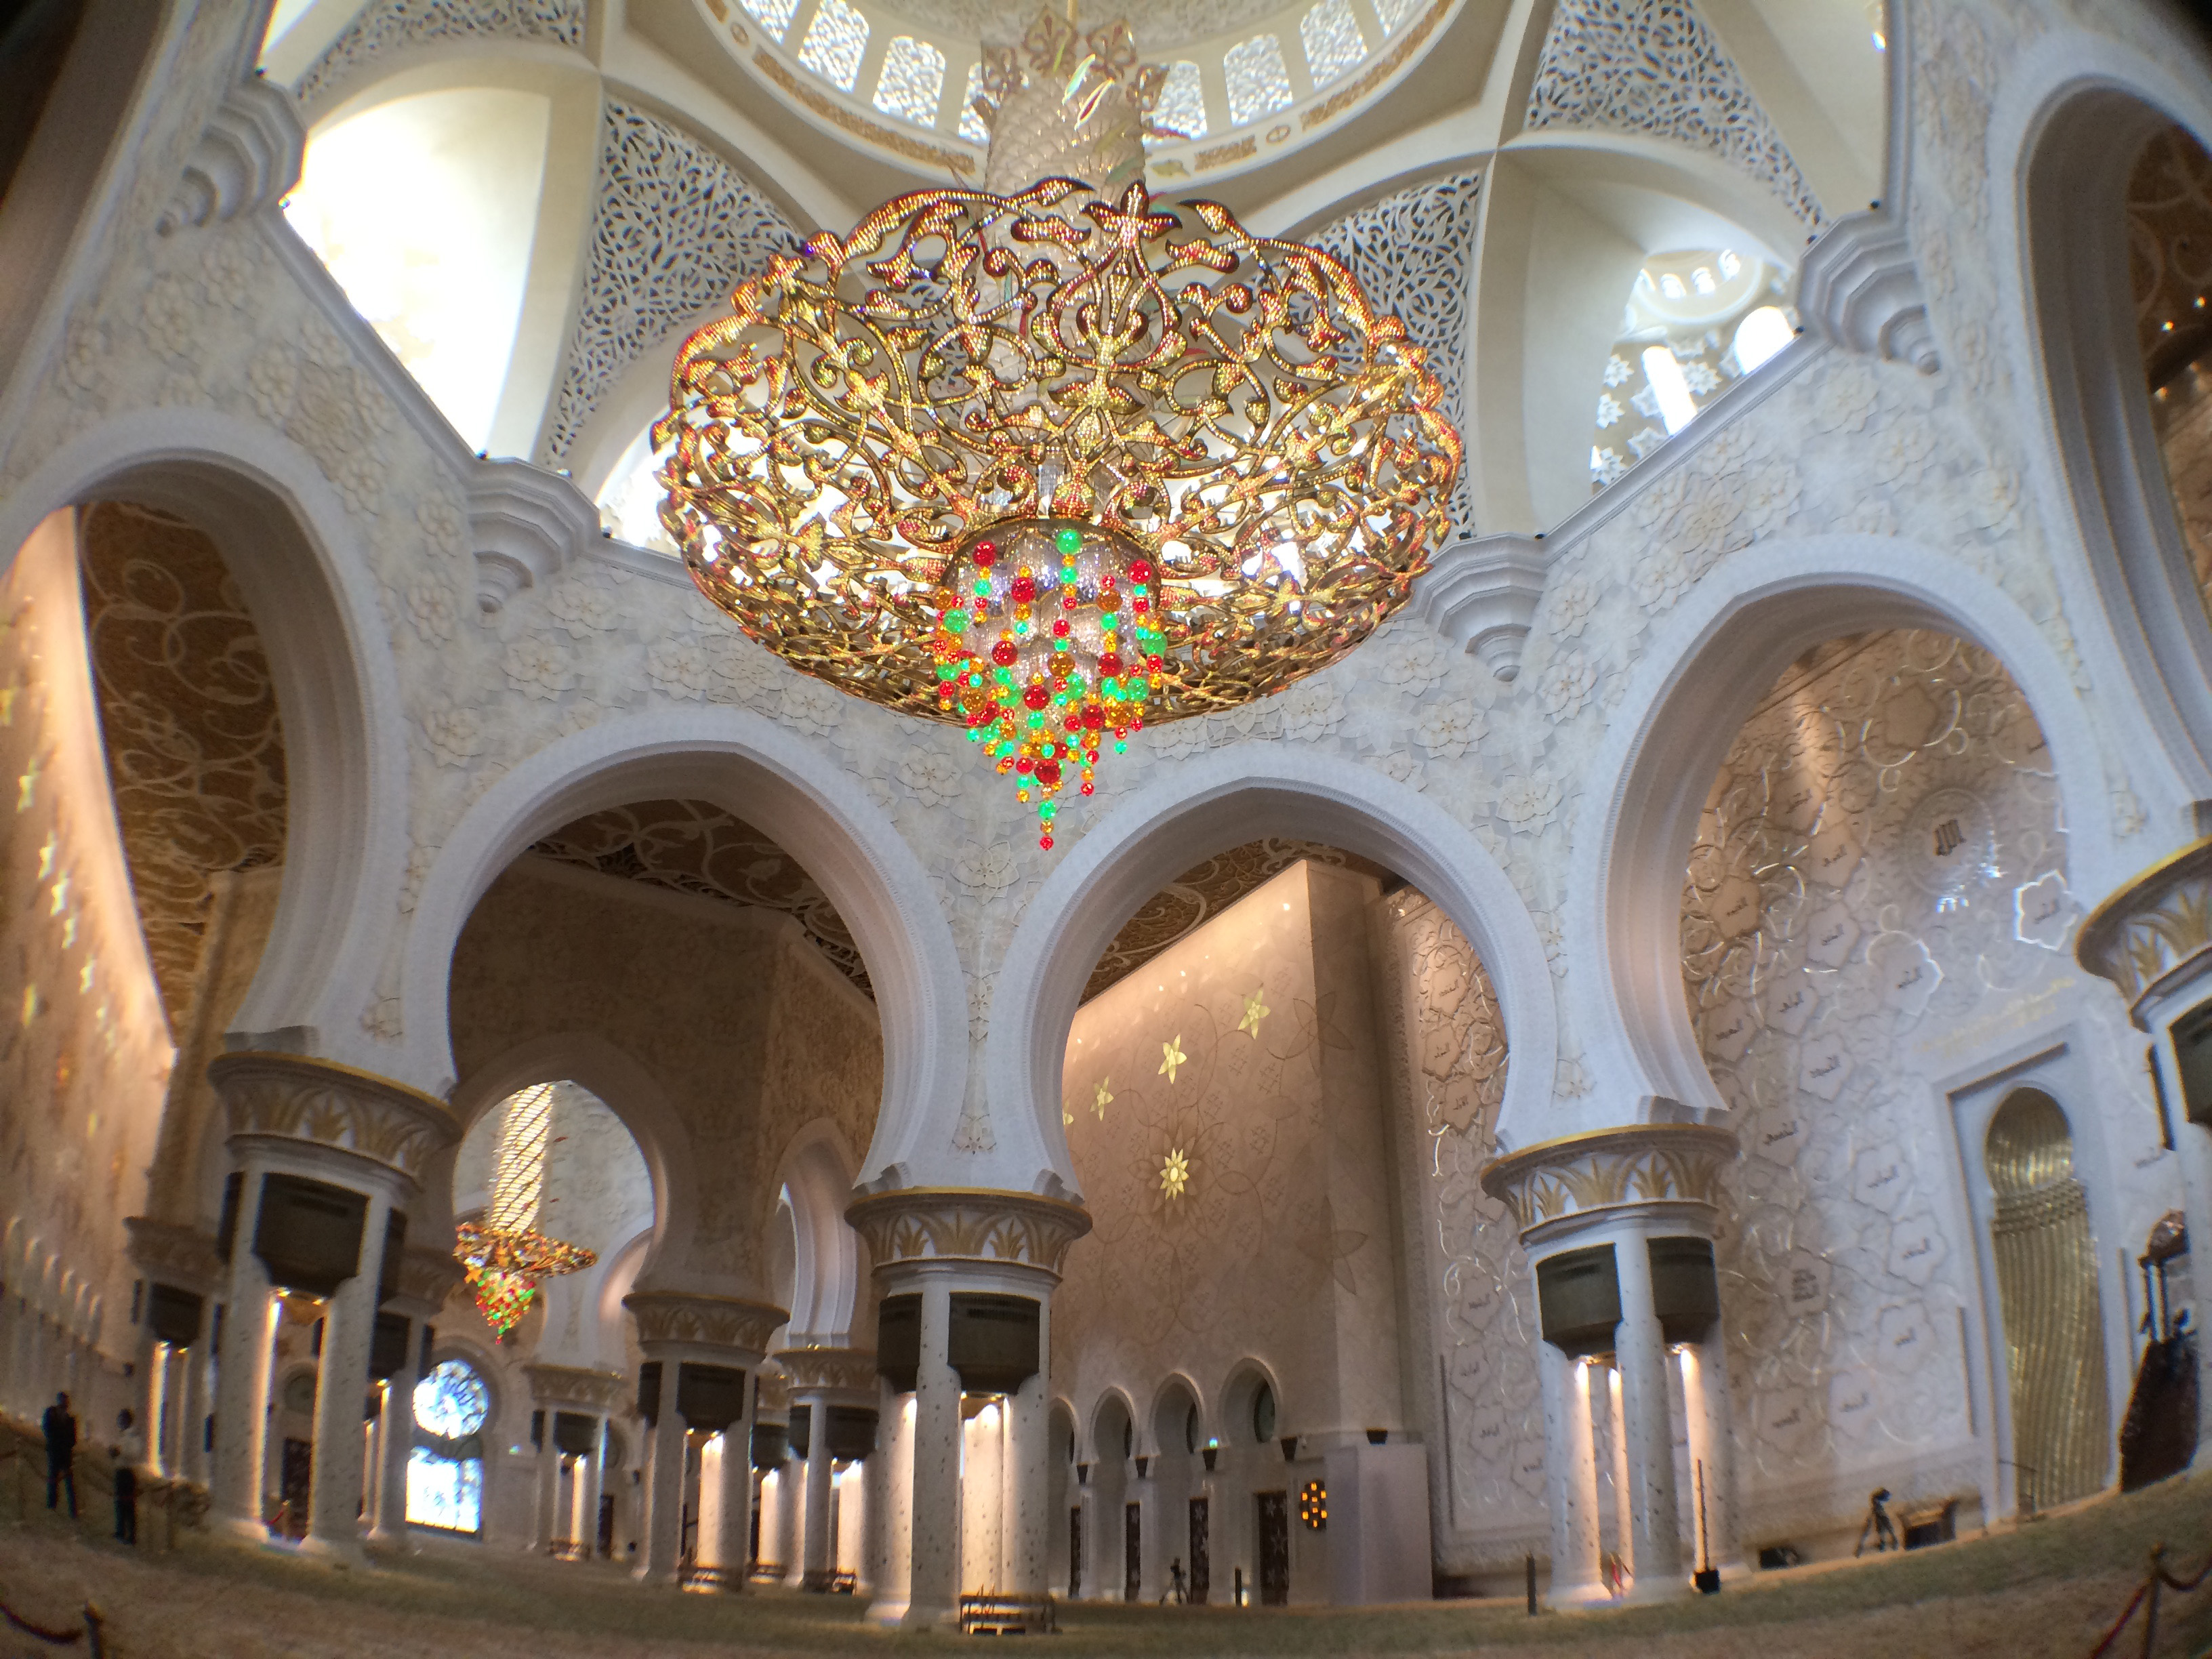 The details inside the Sheikh Zayed Grand Mosque